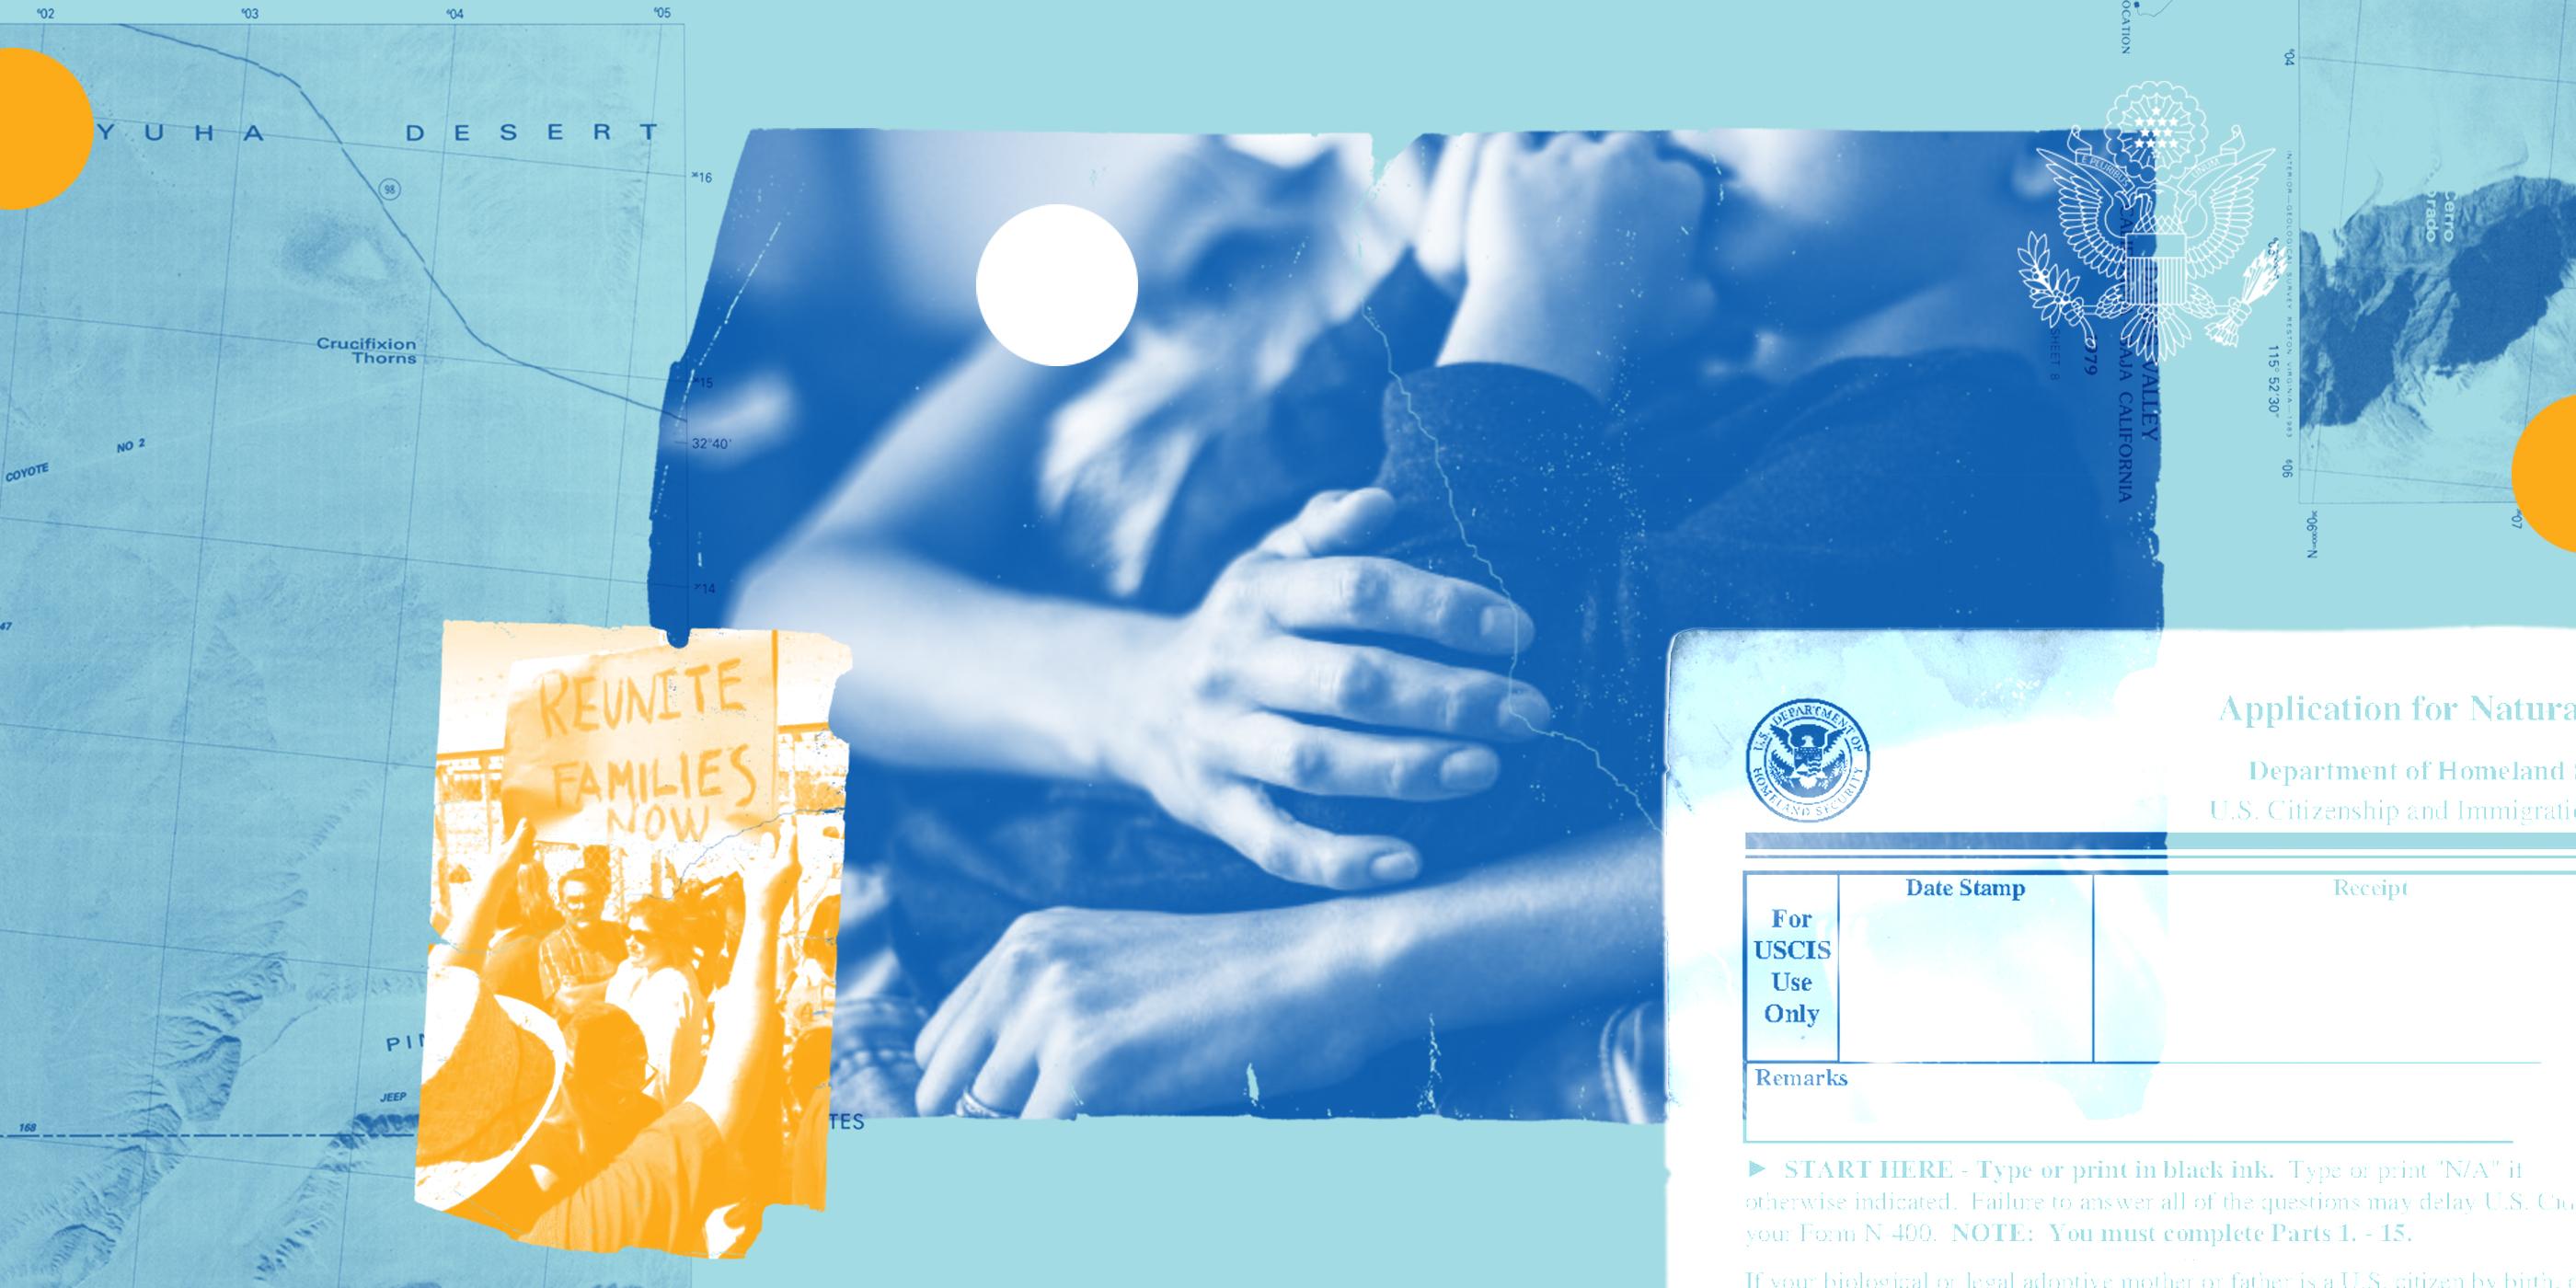 A blue collage image of a "Reunite Families Now" protest sign, a parent holding their child, and naturalization papers.